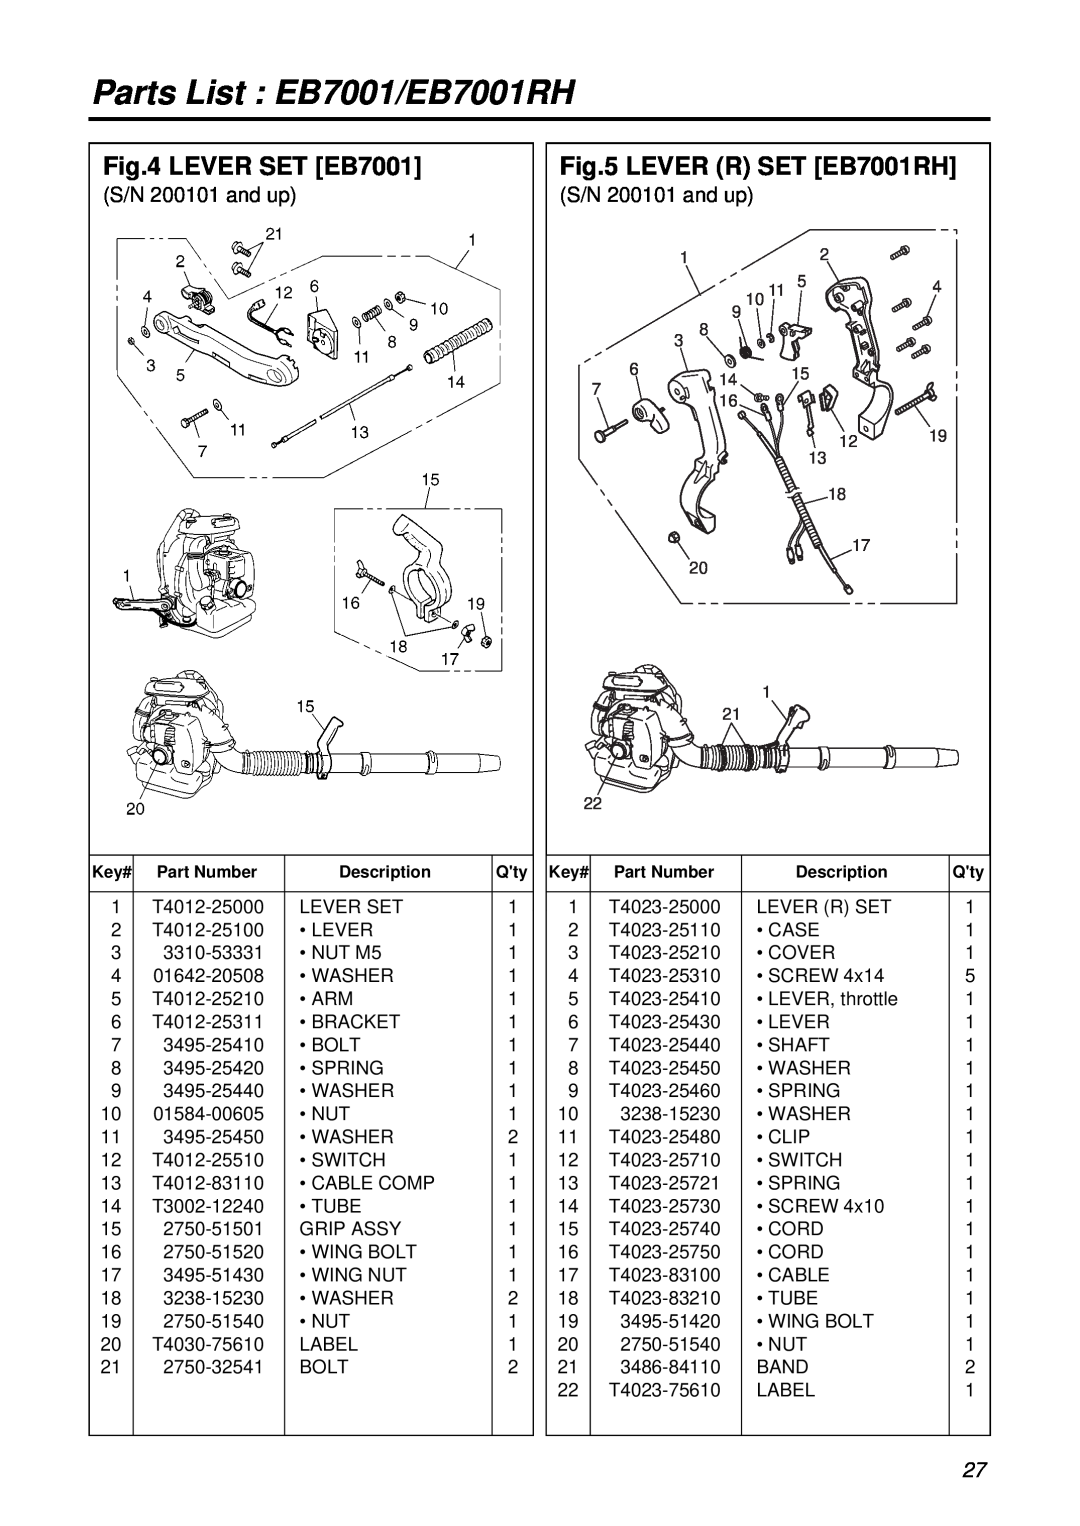 RedMax manual LEVER SET EB7001, LEVER R SET EB7001RH, S/N 200101 and up, Parts List EB7001/EB7001RH 